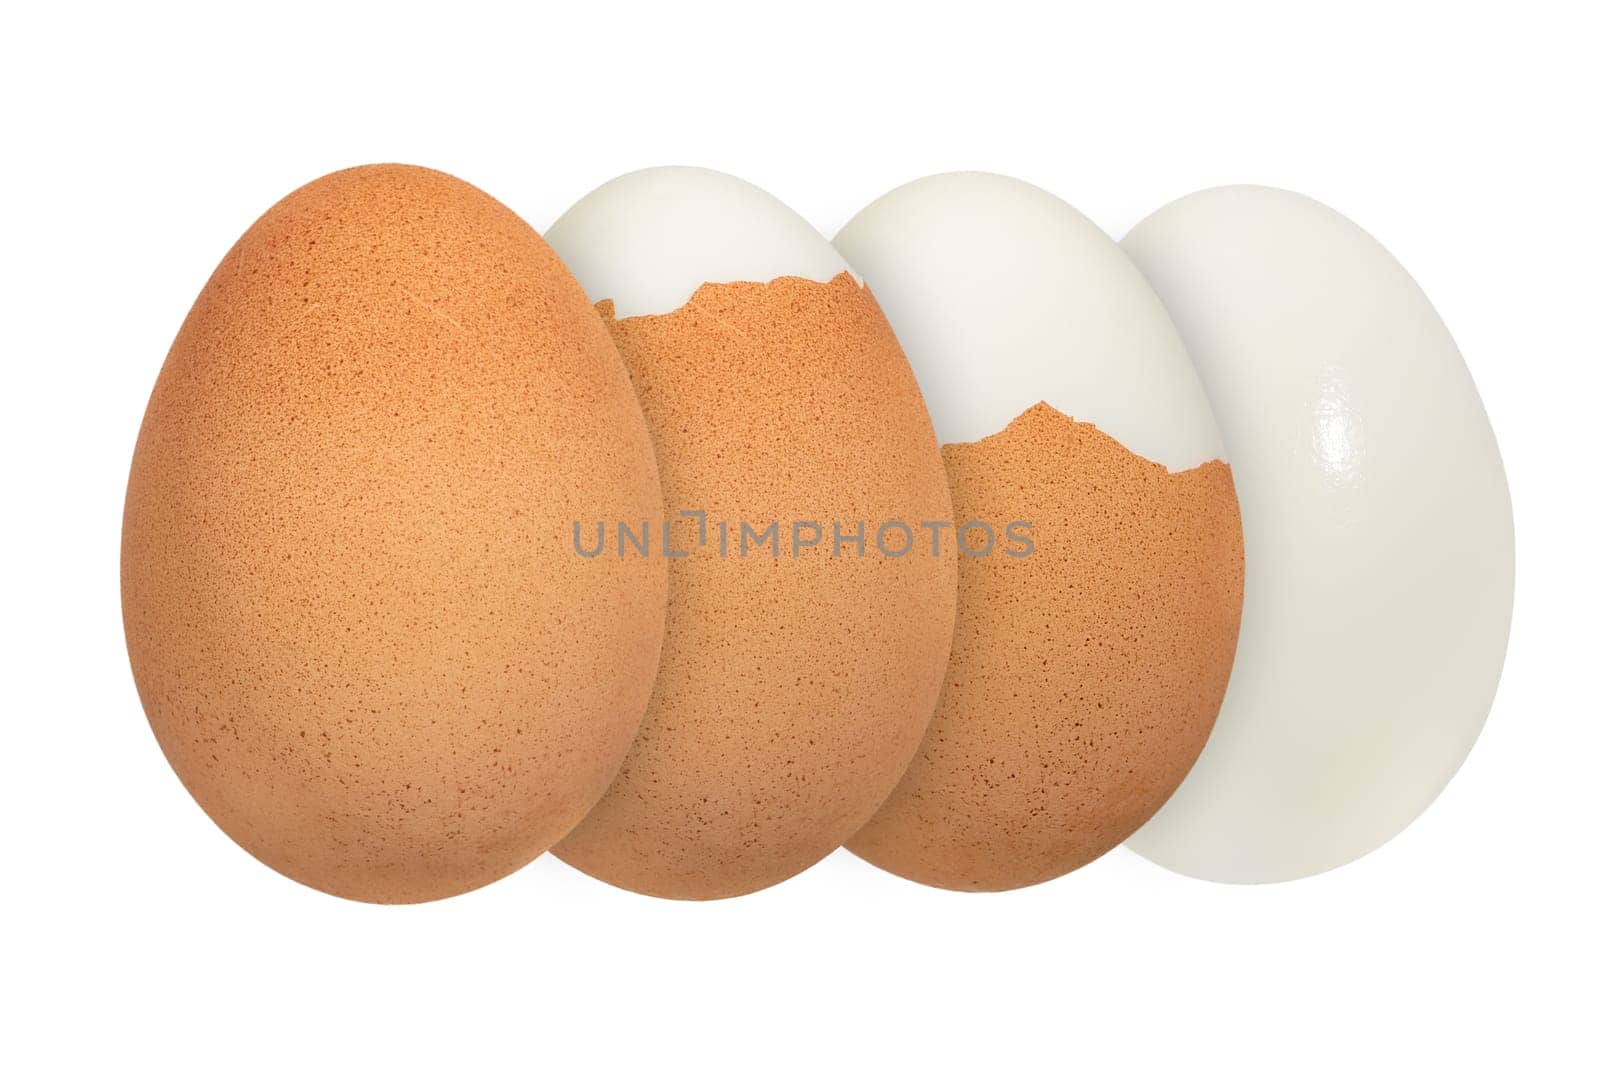 Boiled chicken eggs, with different levels of shelling on a white isolated background. The concept of boiling and cooking eggs. For inserting into designs or as a label for packaging. Side view. by SERSOL